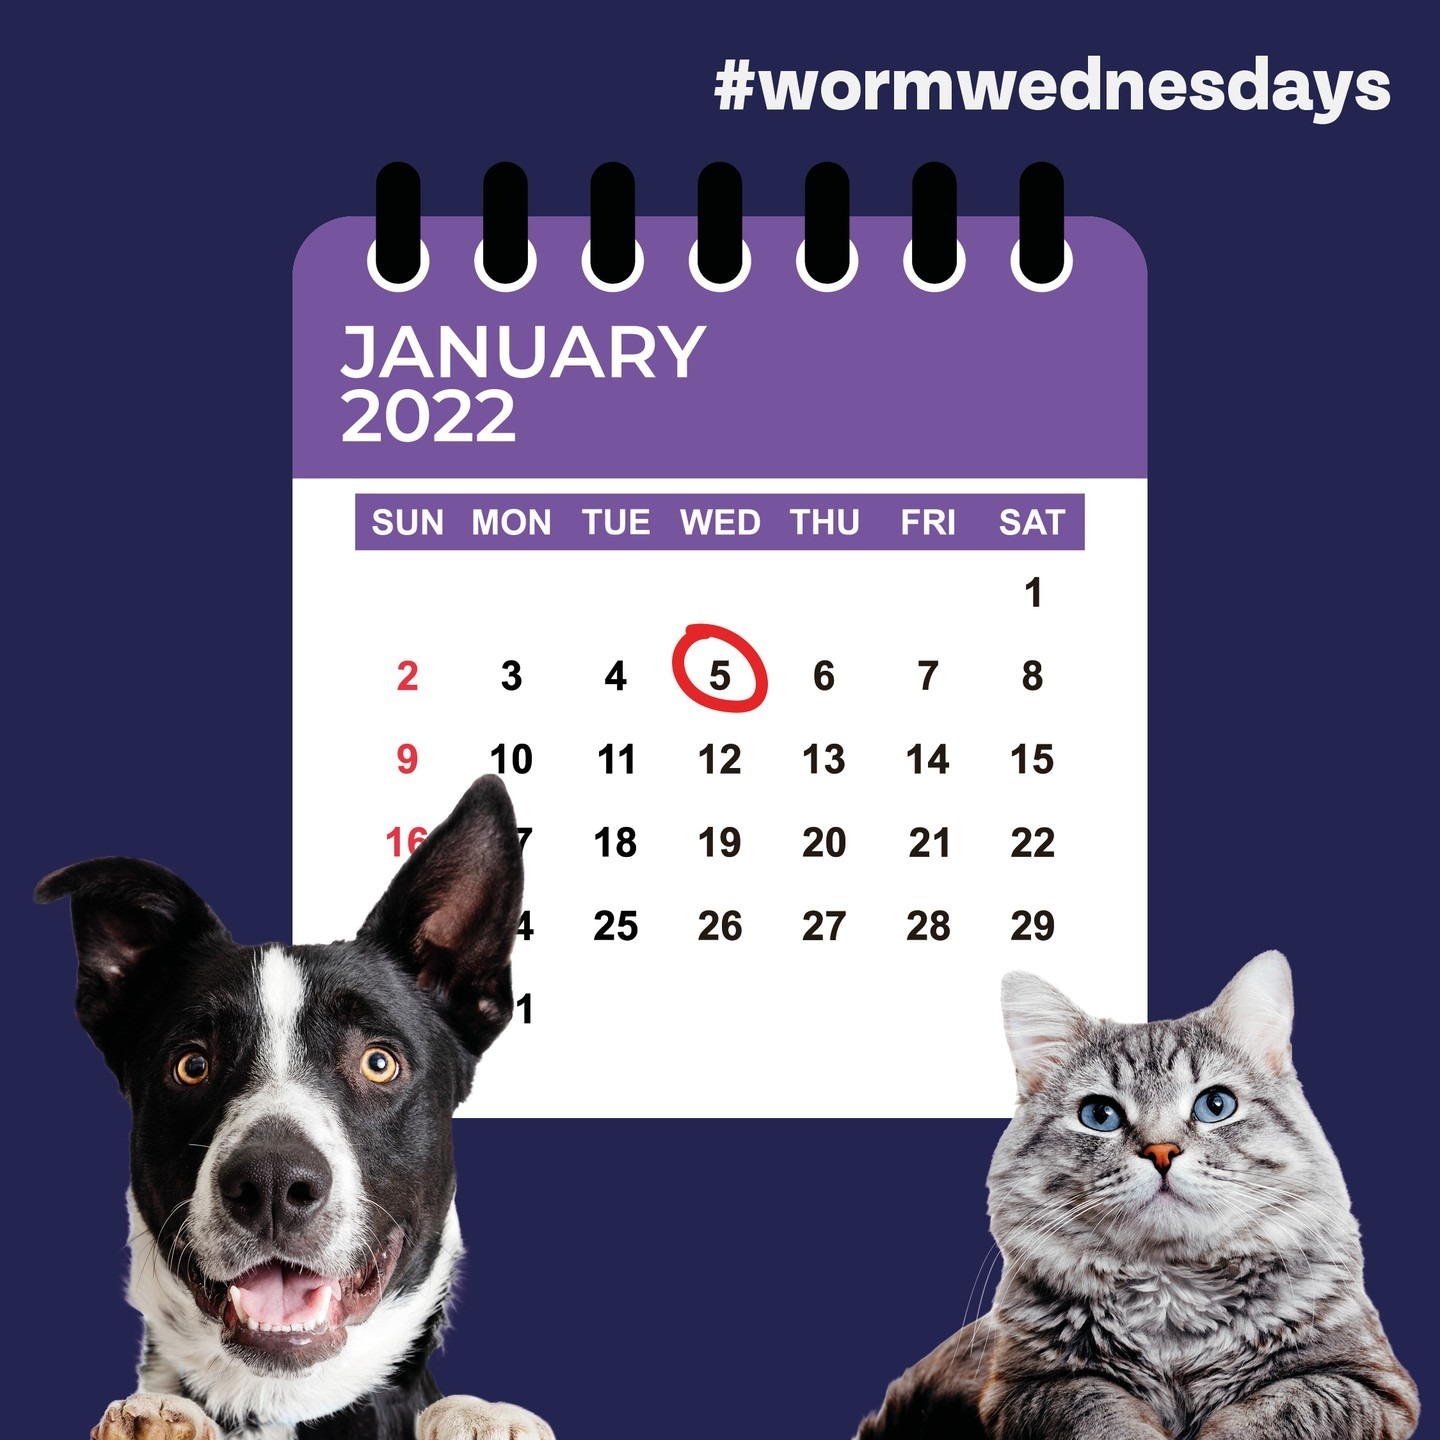 Did you know that most pets need worming monthly? Whilst each individual pet’s needs are different, based on their lifestyle and diet it is likely that the vast majority should be treated for worms every month.

Here is your reminder to pick up Bob Martin’s Wormer Treatment for your pet via the link in our bio

*Survey of UK pet owners quantifying internal parasite infection risk and deworming recommendation implications. Pennelegion et al. Parasites Vectors 13, 218 (2020)

 #BobMartin #PetHealthcare #Flea #Worm #Dog #Cat #SpotOn #Pets #PetsOfInstagram #PetCare #PetTips #PetHealth #HealthyPets #ActivePets